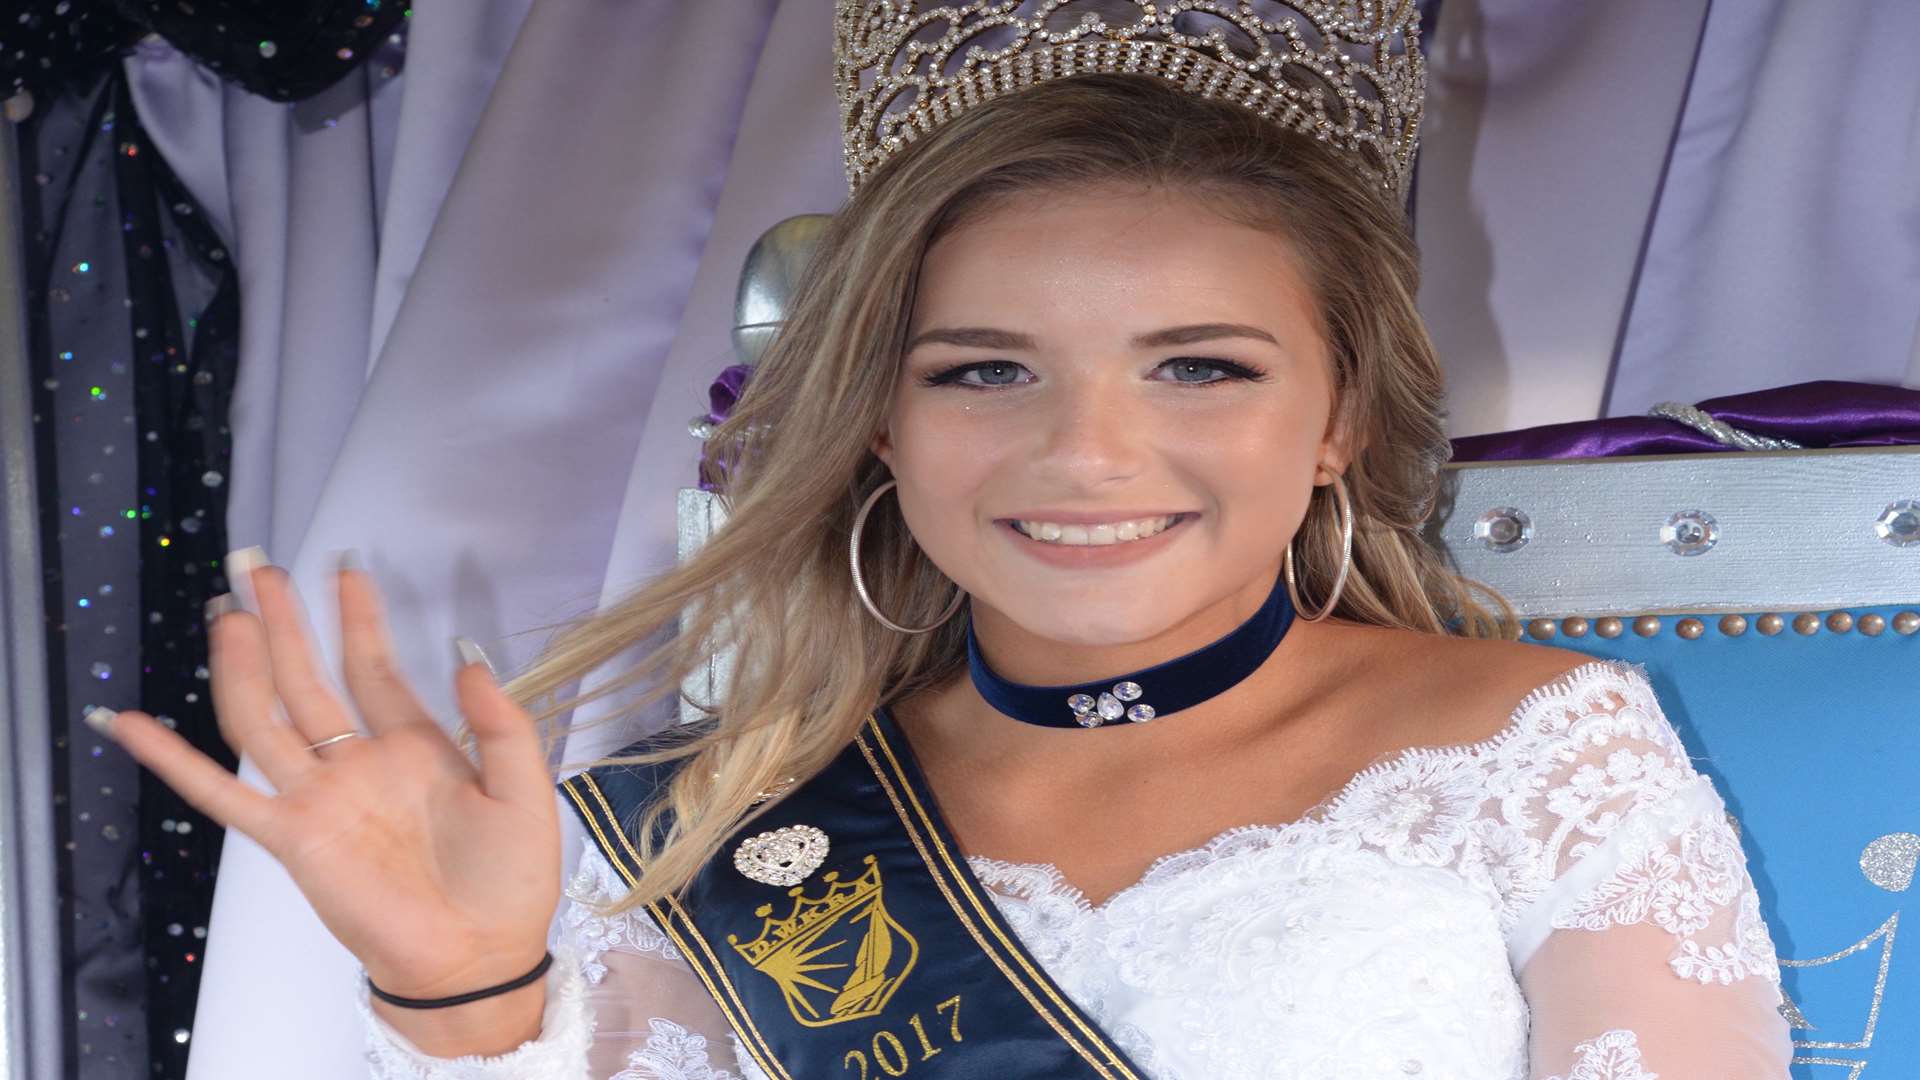 Deal Regatta Queen Kelsi Endean waved to the crowds